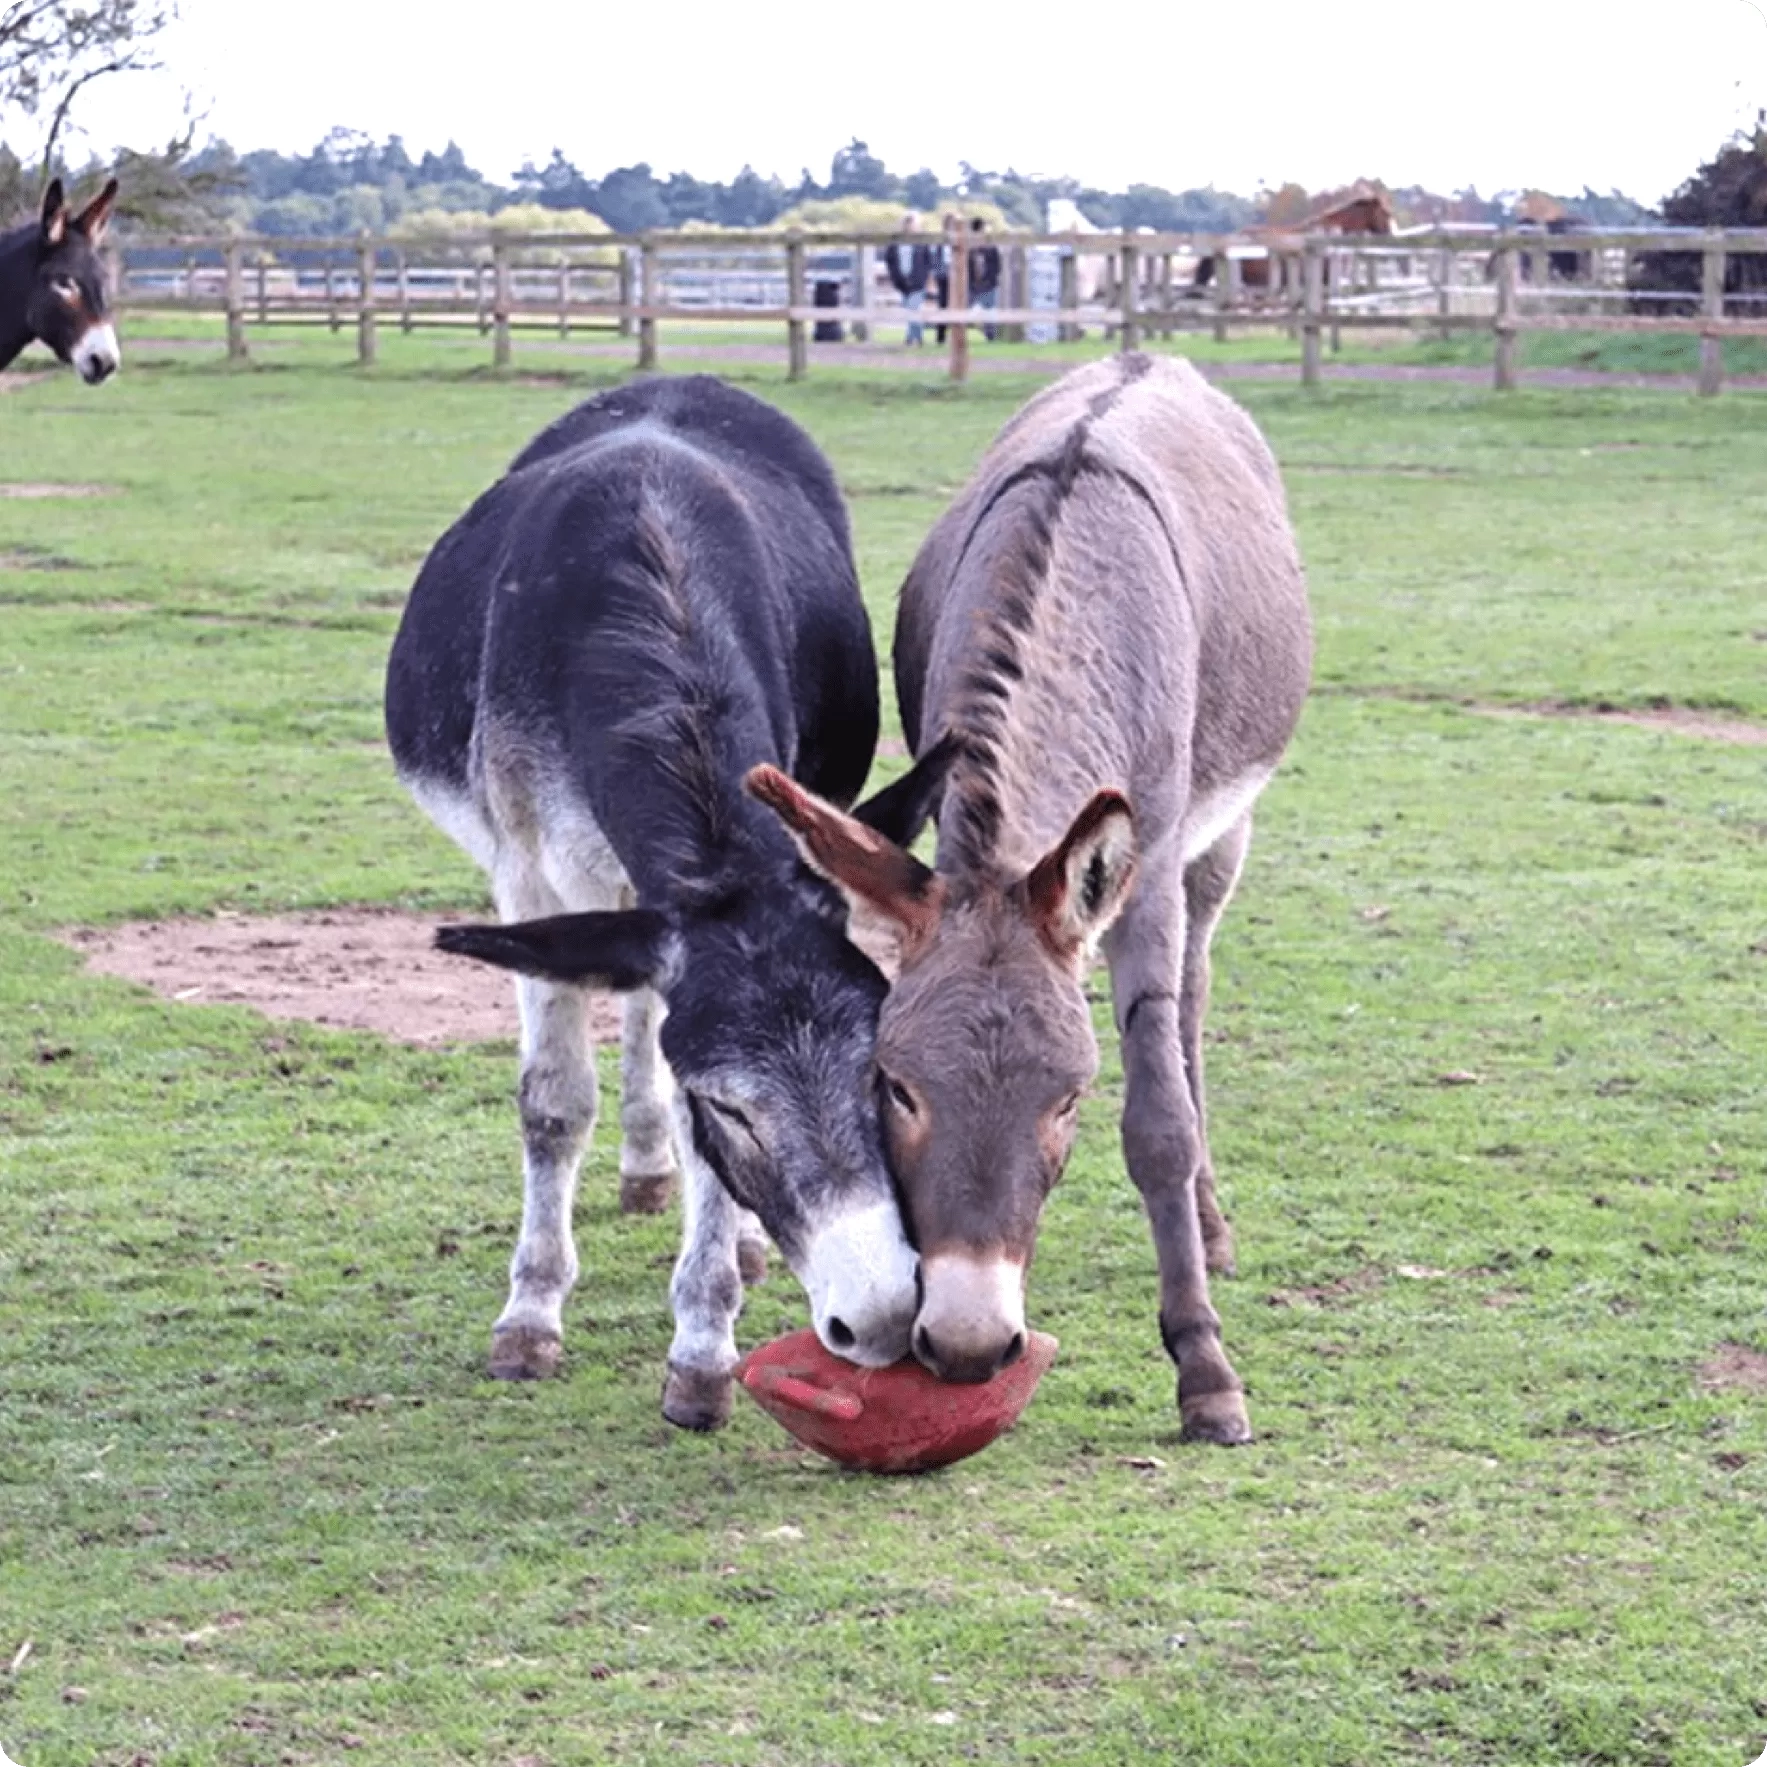 Two donkeys tugging a ball